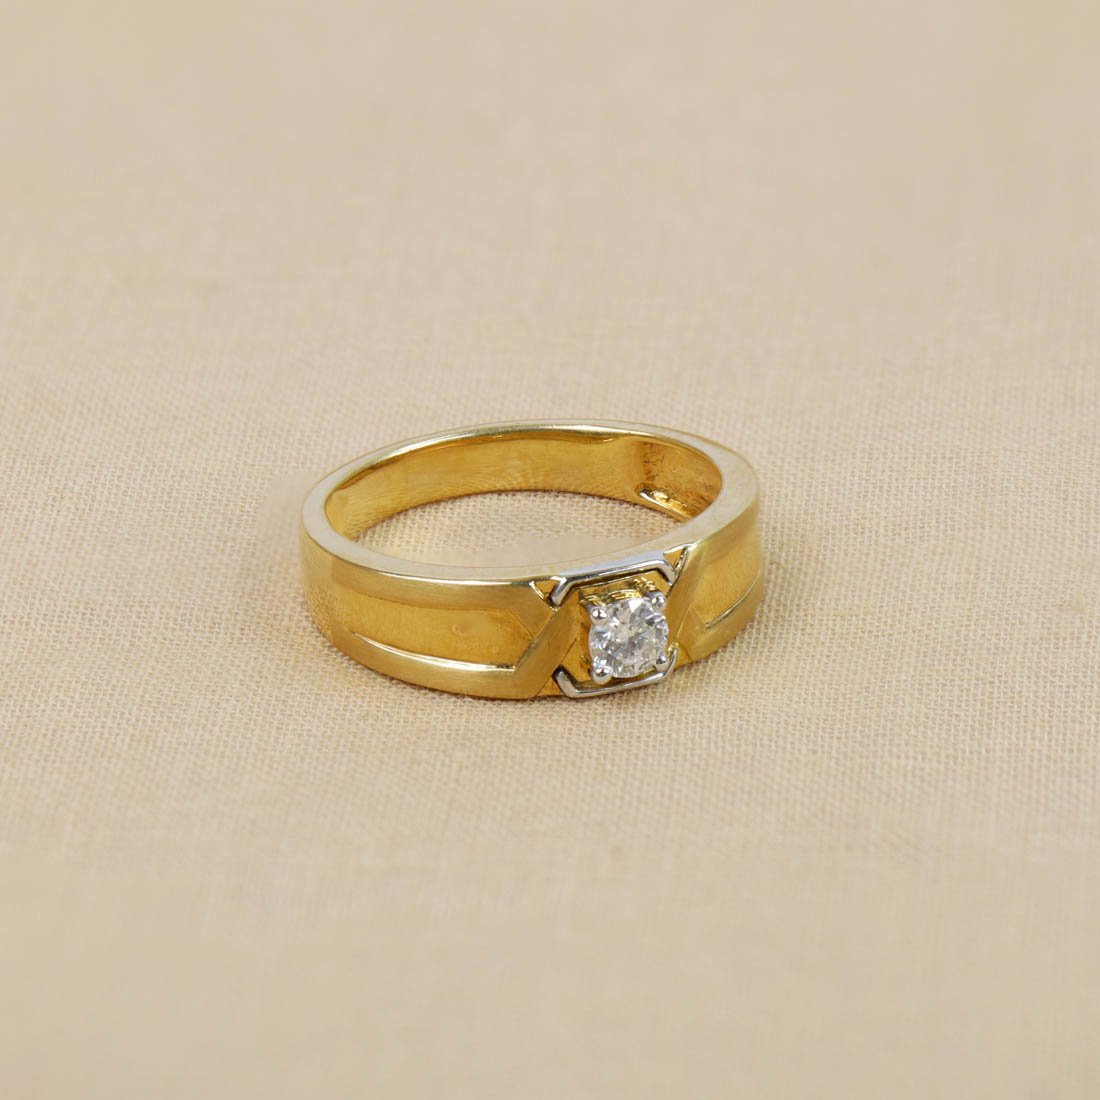 Buy Yellow Gold Rings for Men by KuberBox Online | Ajio.com